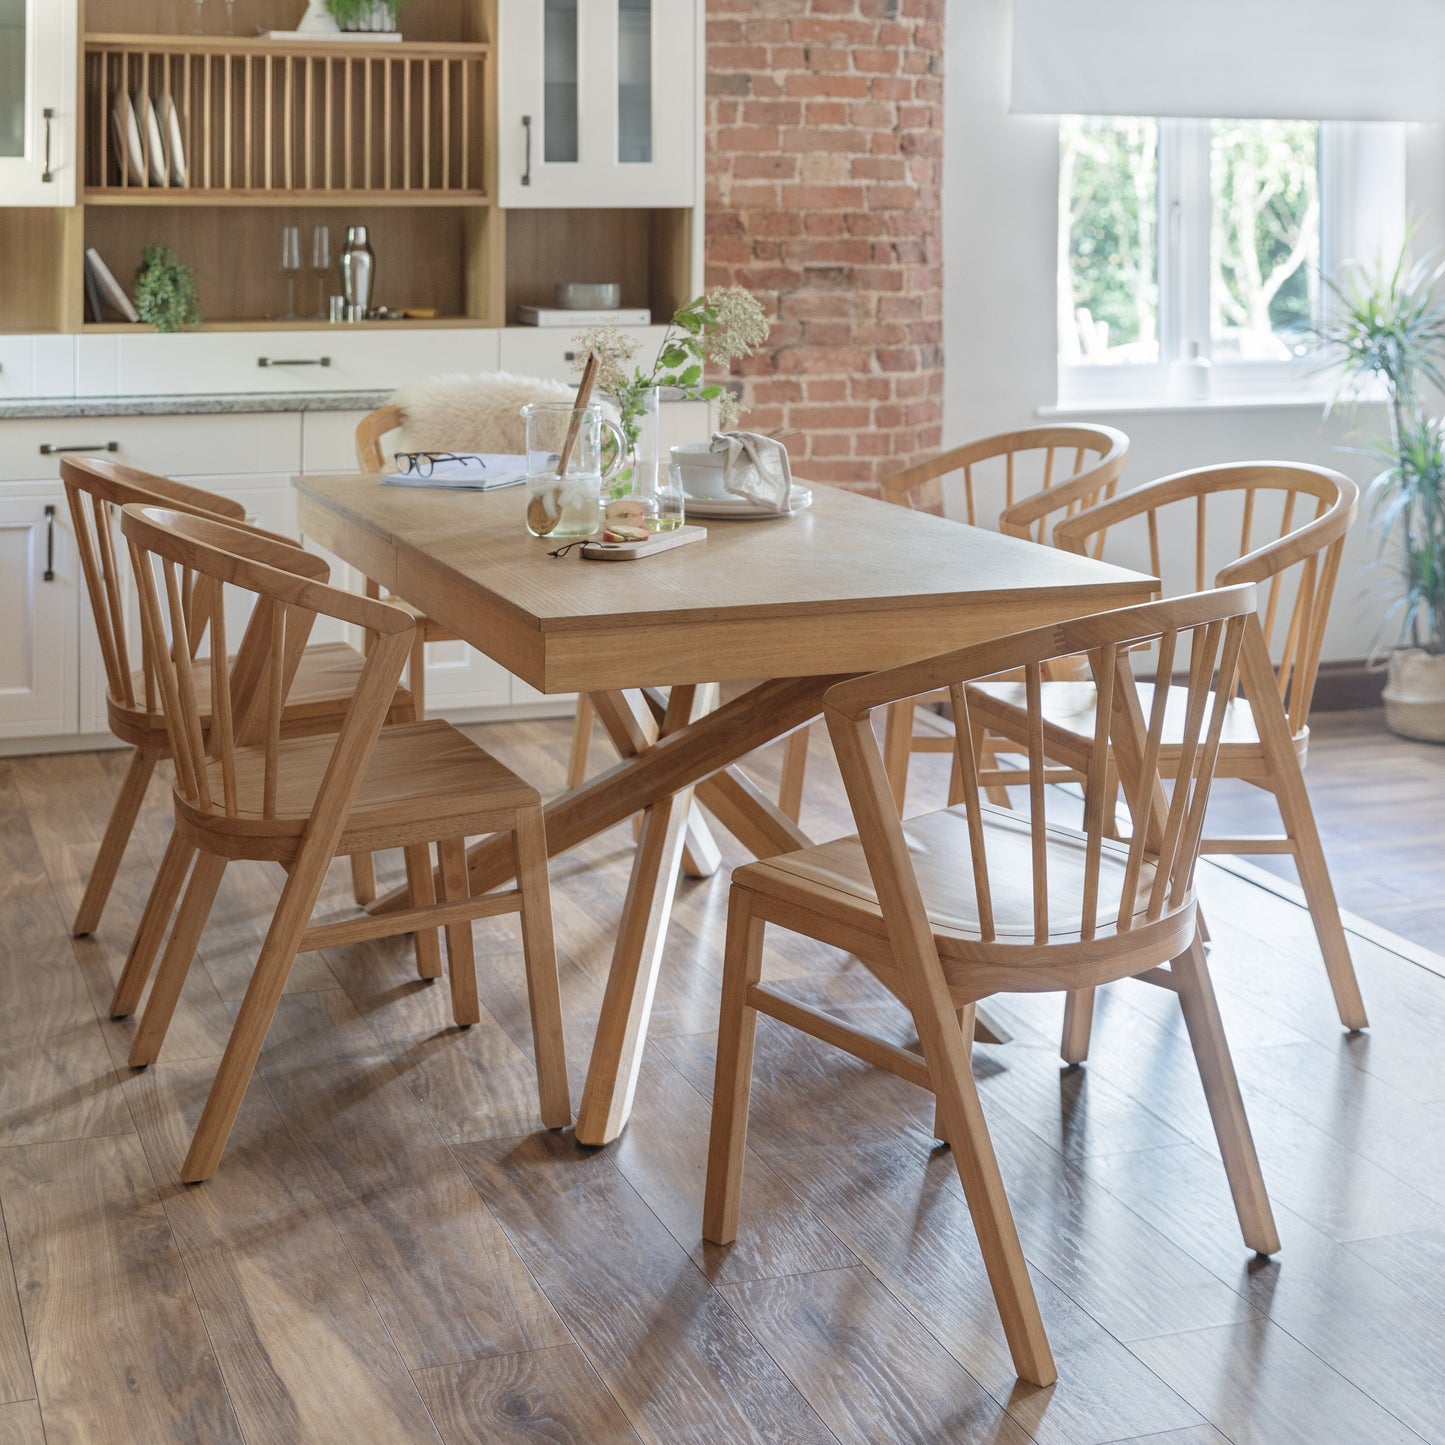 Amelia Oak Dining Table Set - 6 Seater - Oak Spindle Back Chairs